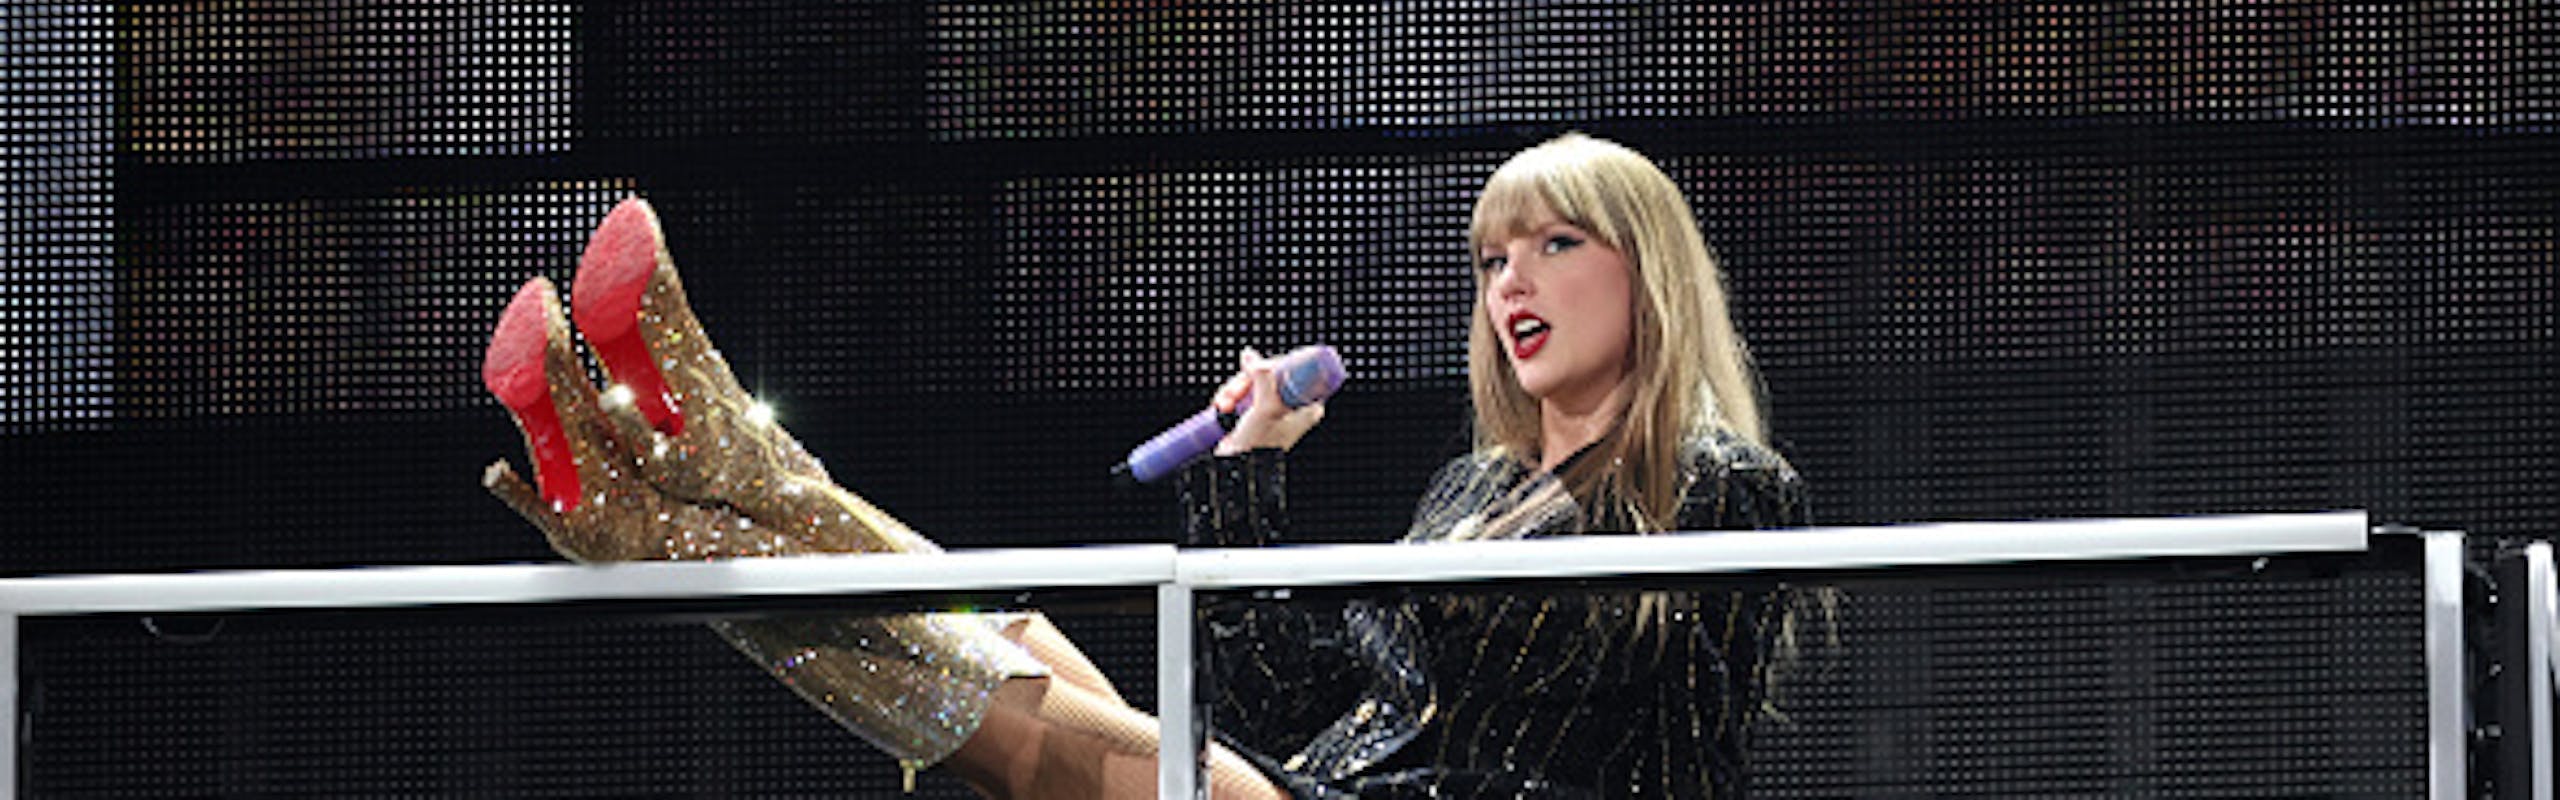 Taylor Swift performing in gold boots and a striped sparkly blazer in Paris for The Eras Tour. Getty Images.